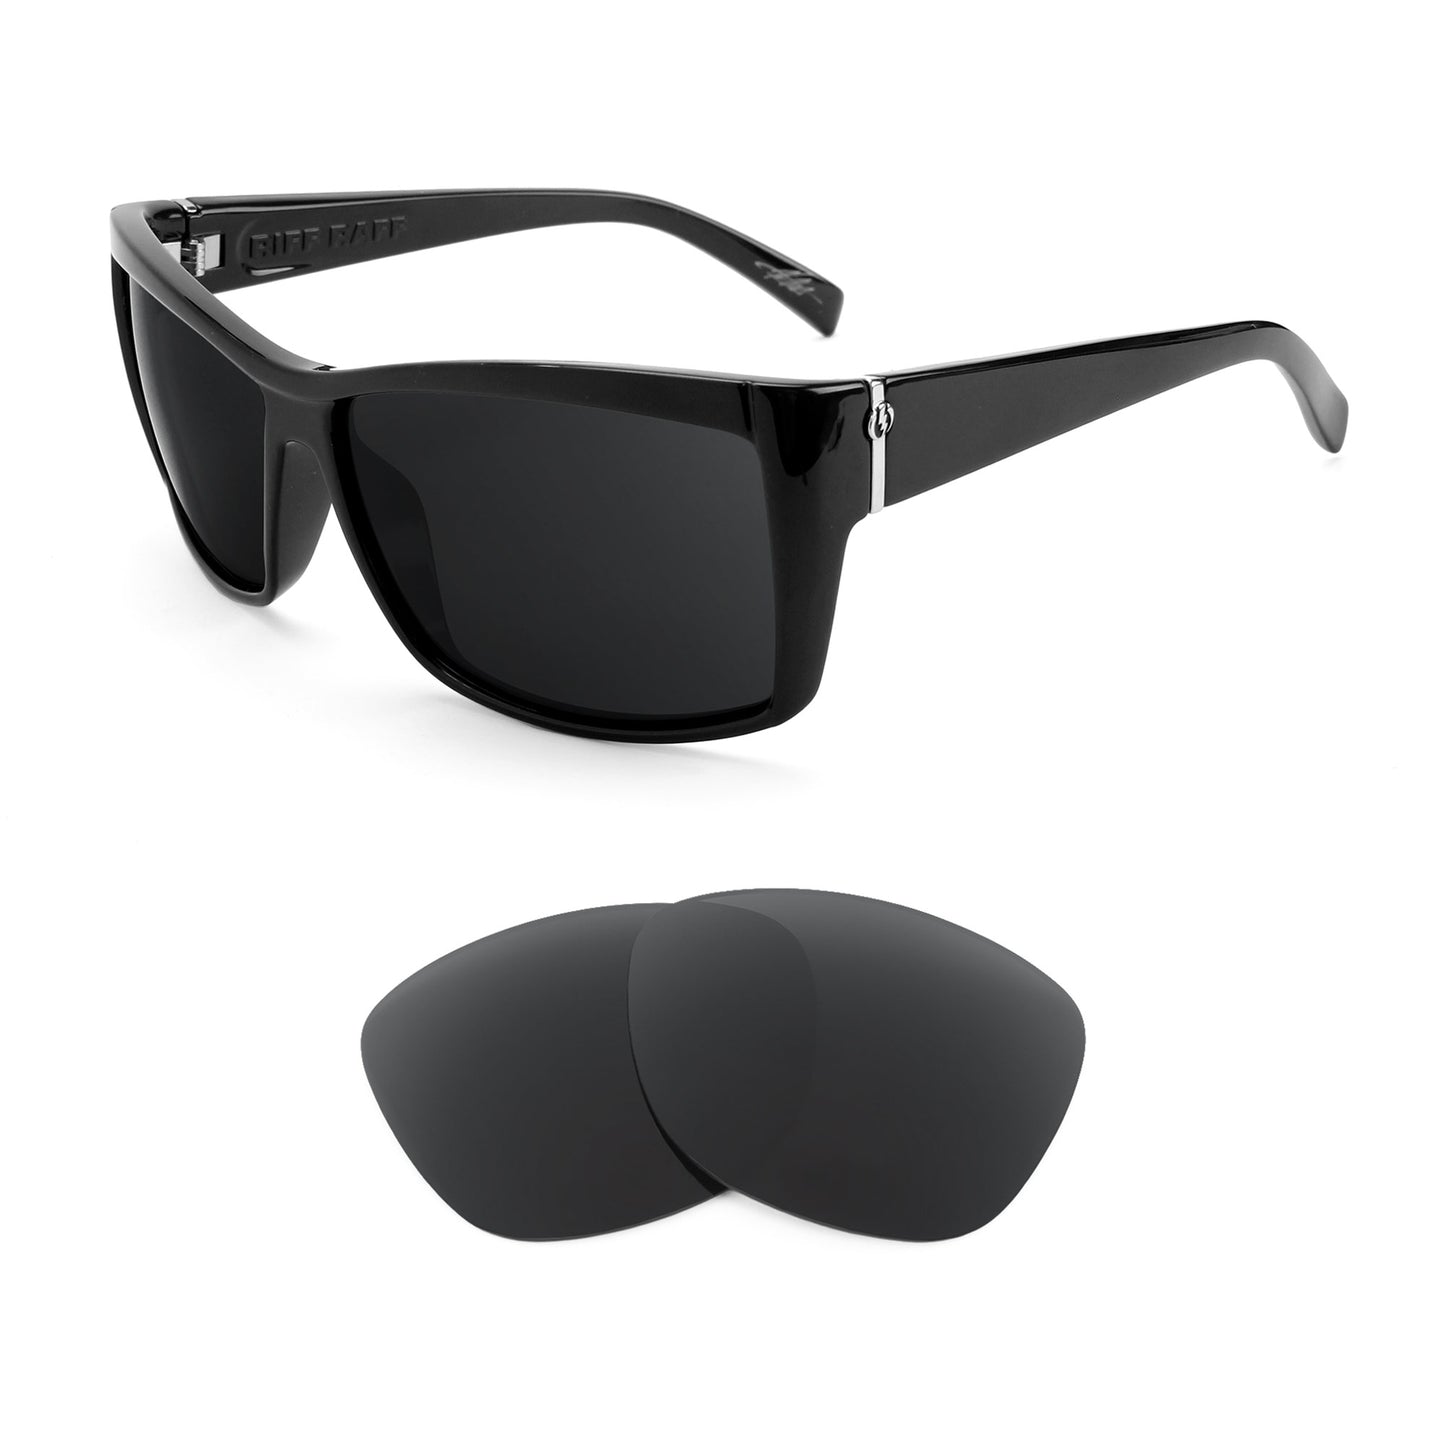 Electric Riff Raff sunglasses with replacement lenses